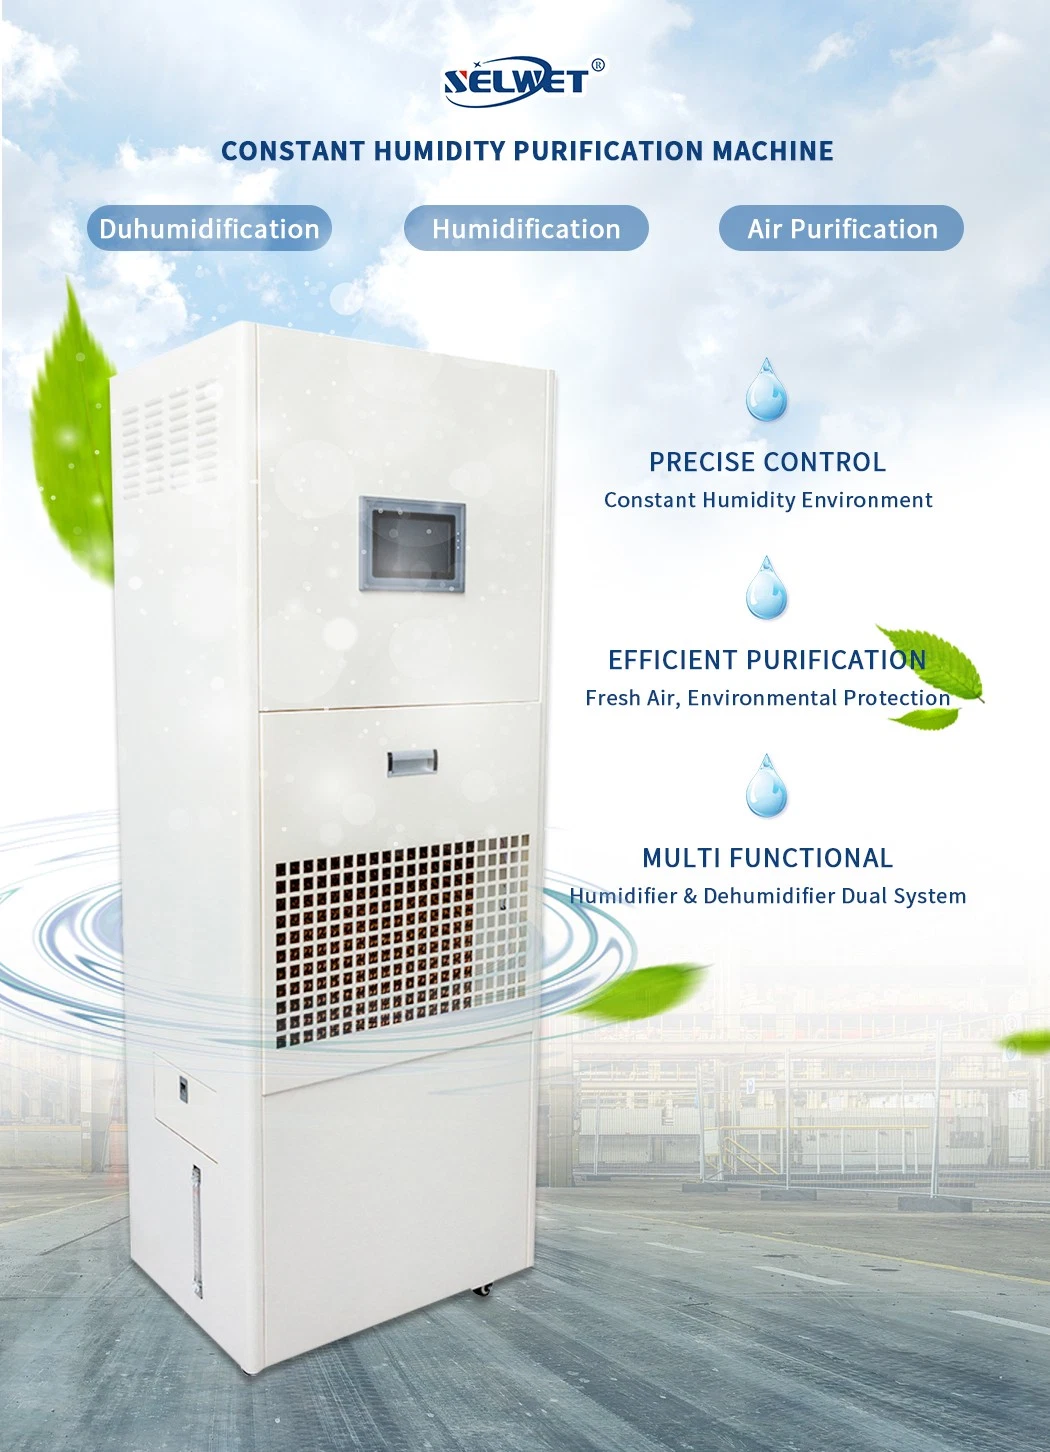 All-in-One Industrial Commercial Air Purifier Humidifier Dehumidifier Combo